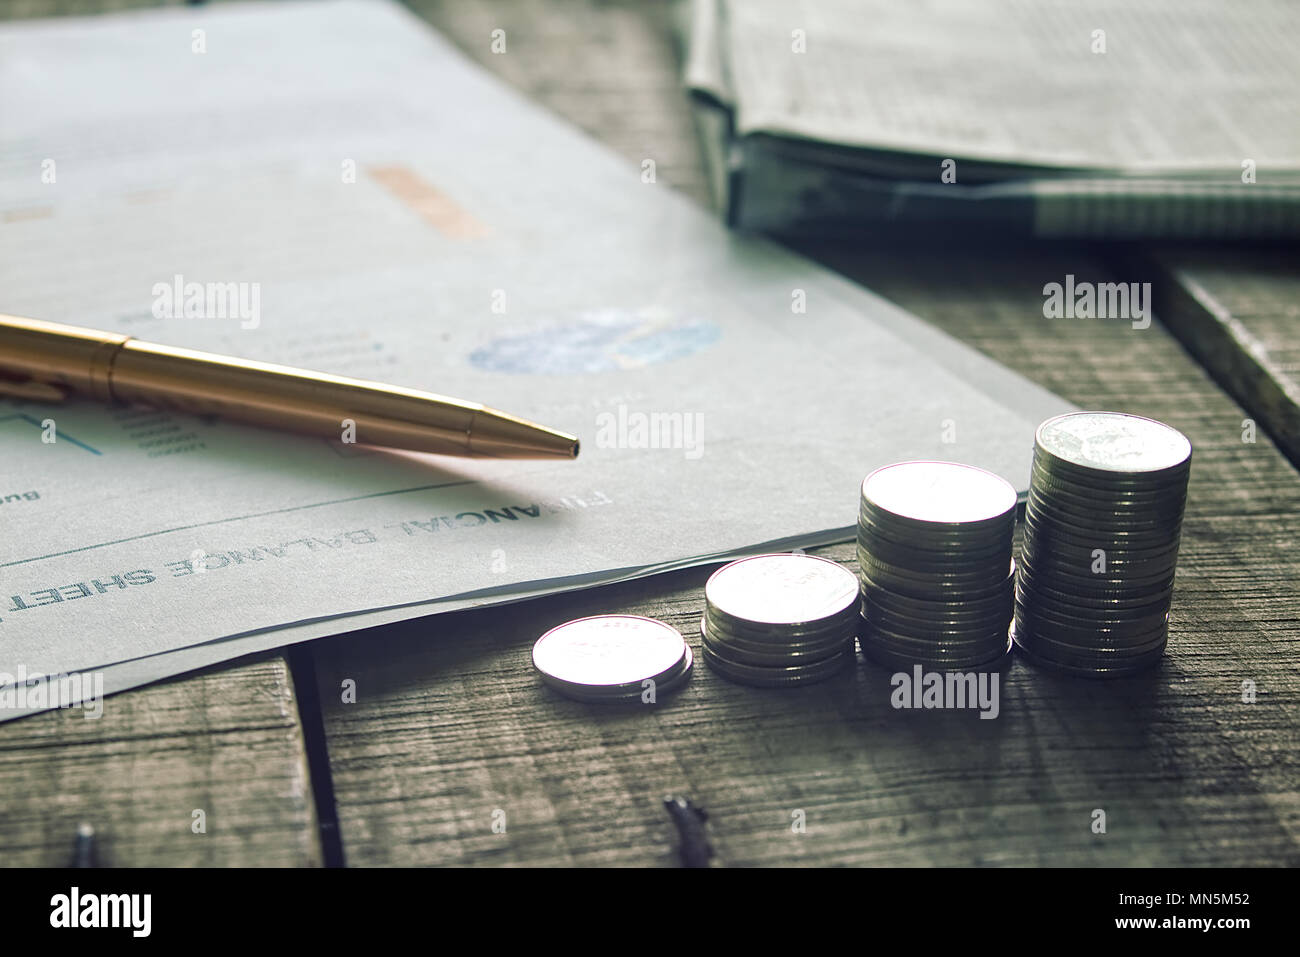 Stack of money on working desk, business concept. Stock Photo